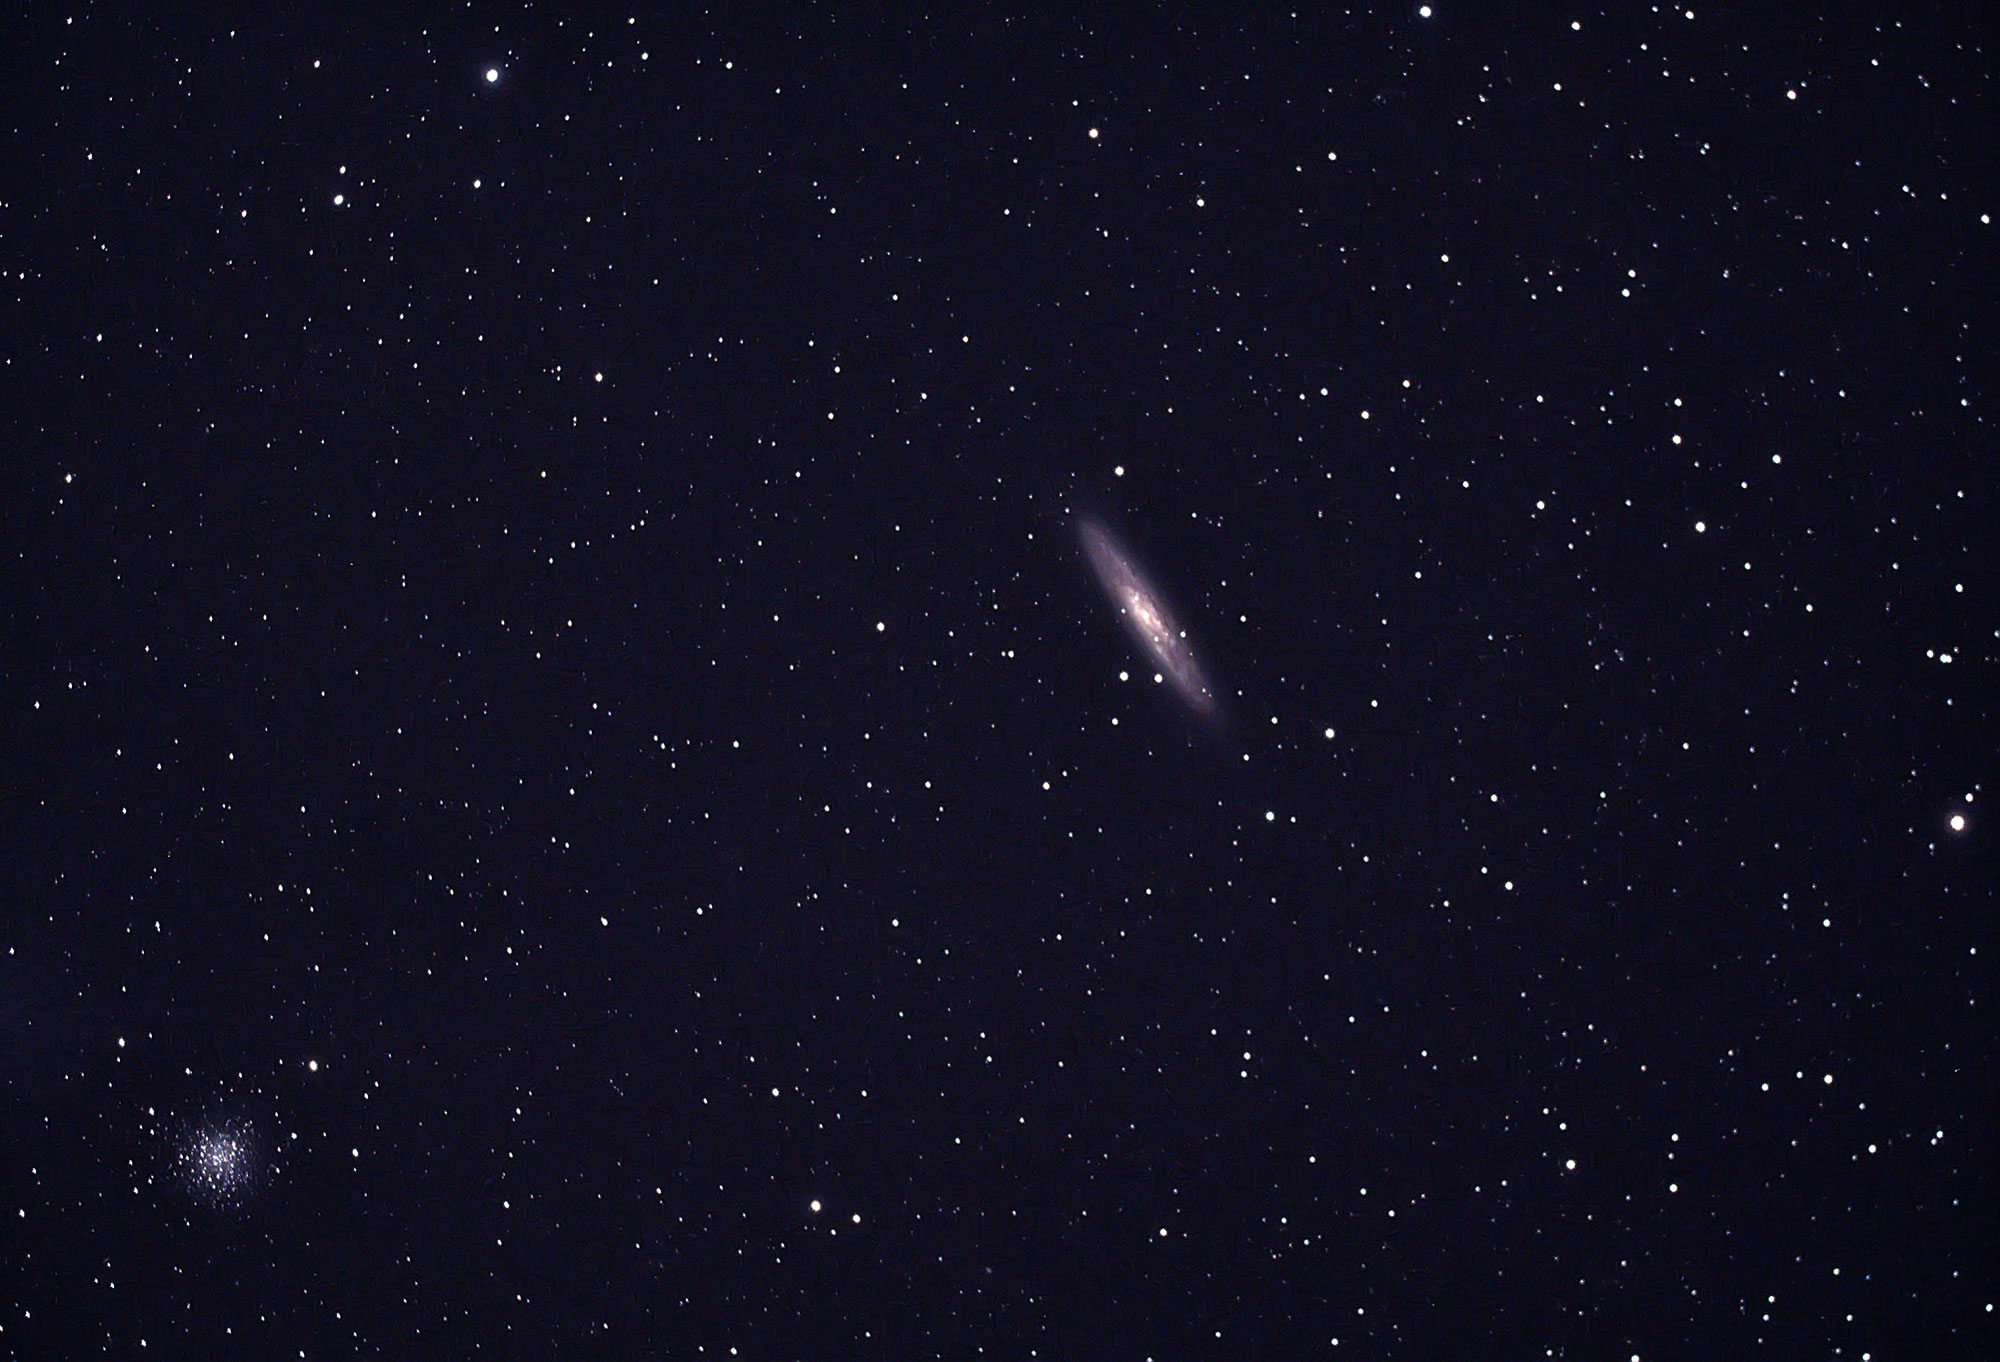 astrophotography of ngc253 with William Optics GT71 using asi 294 mcpro colour camera